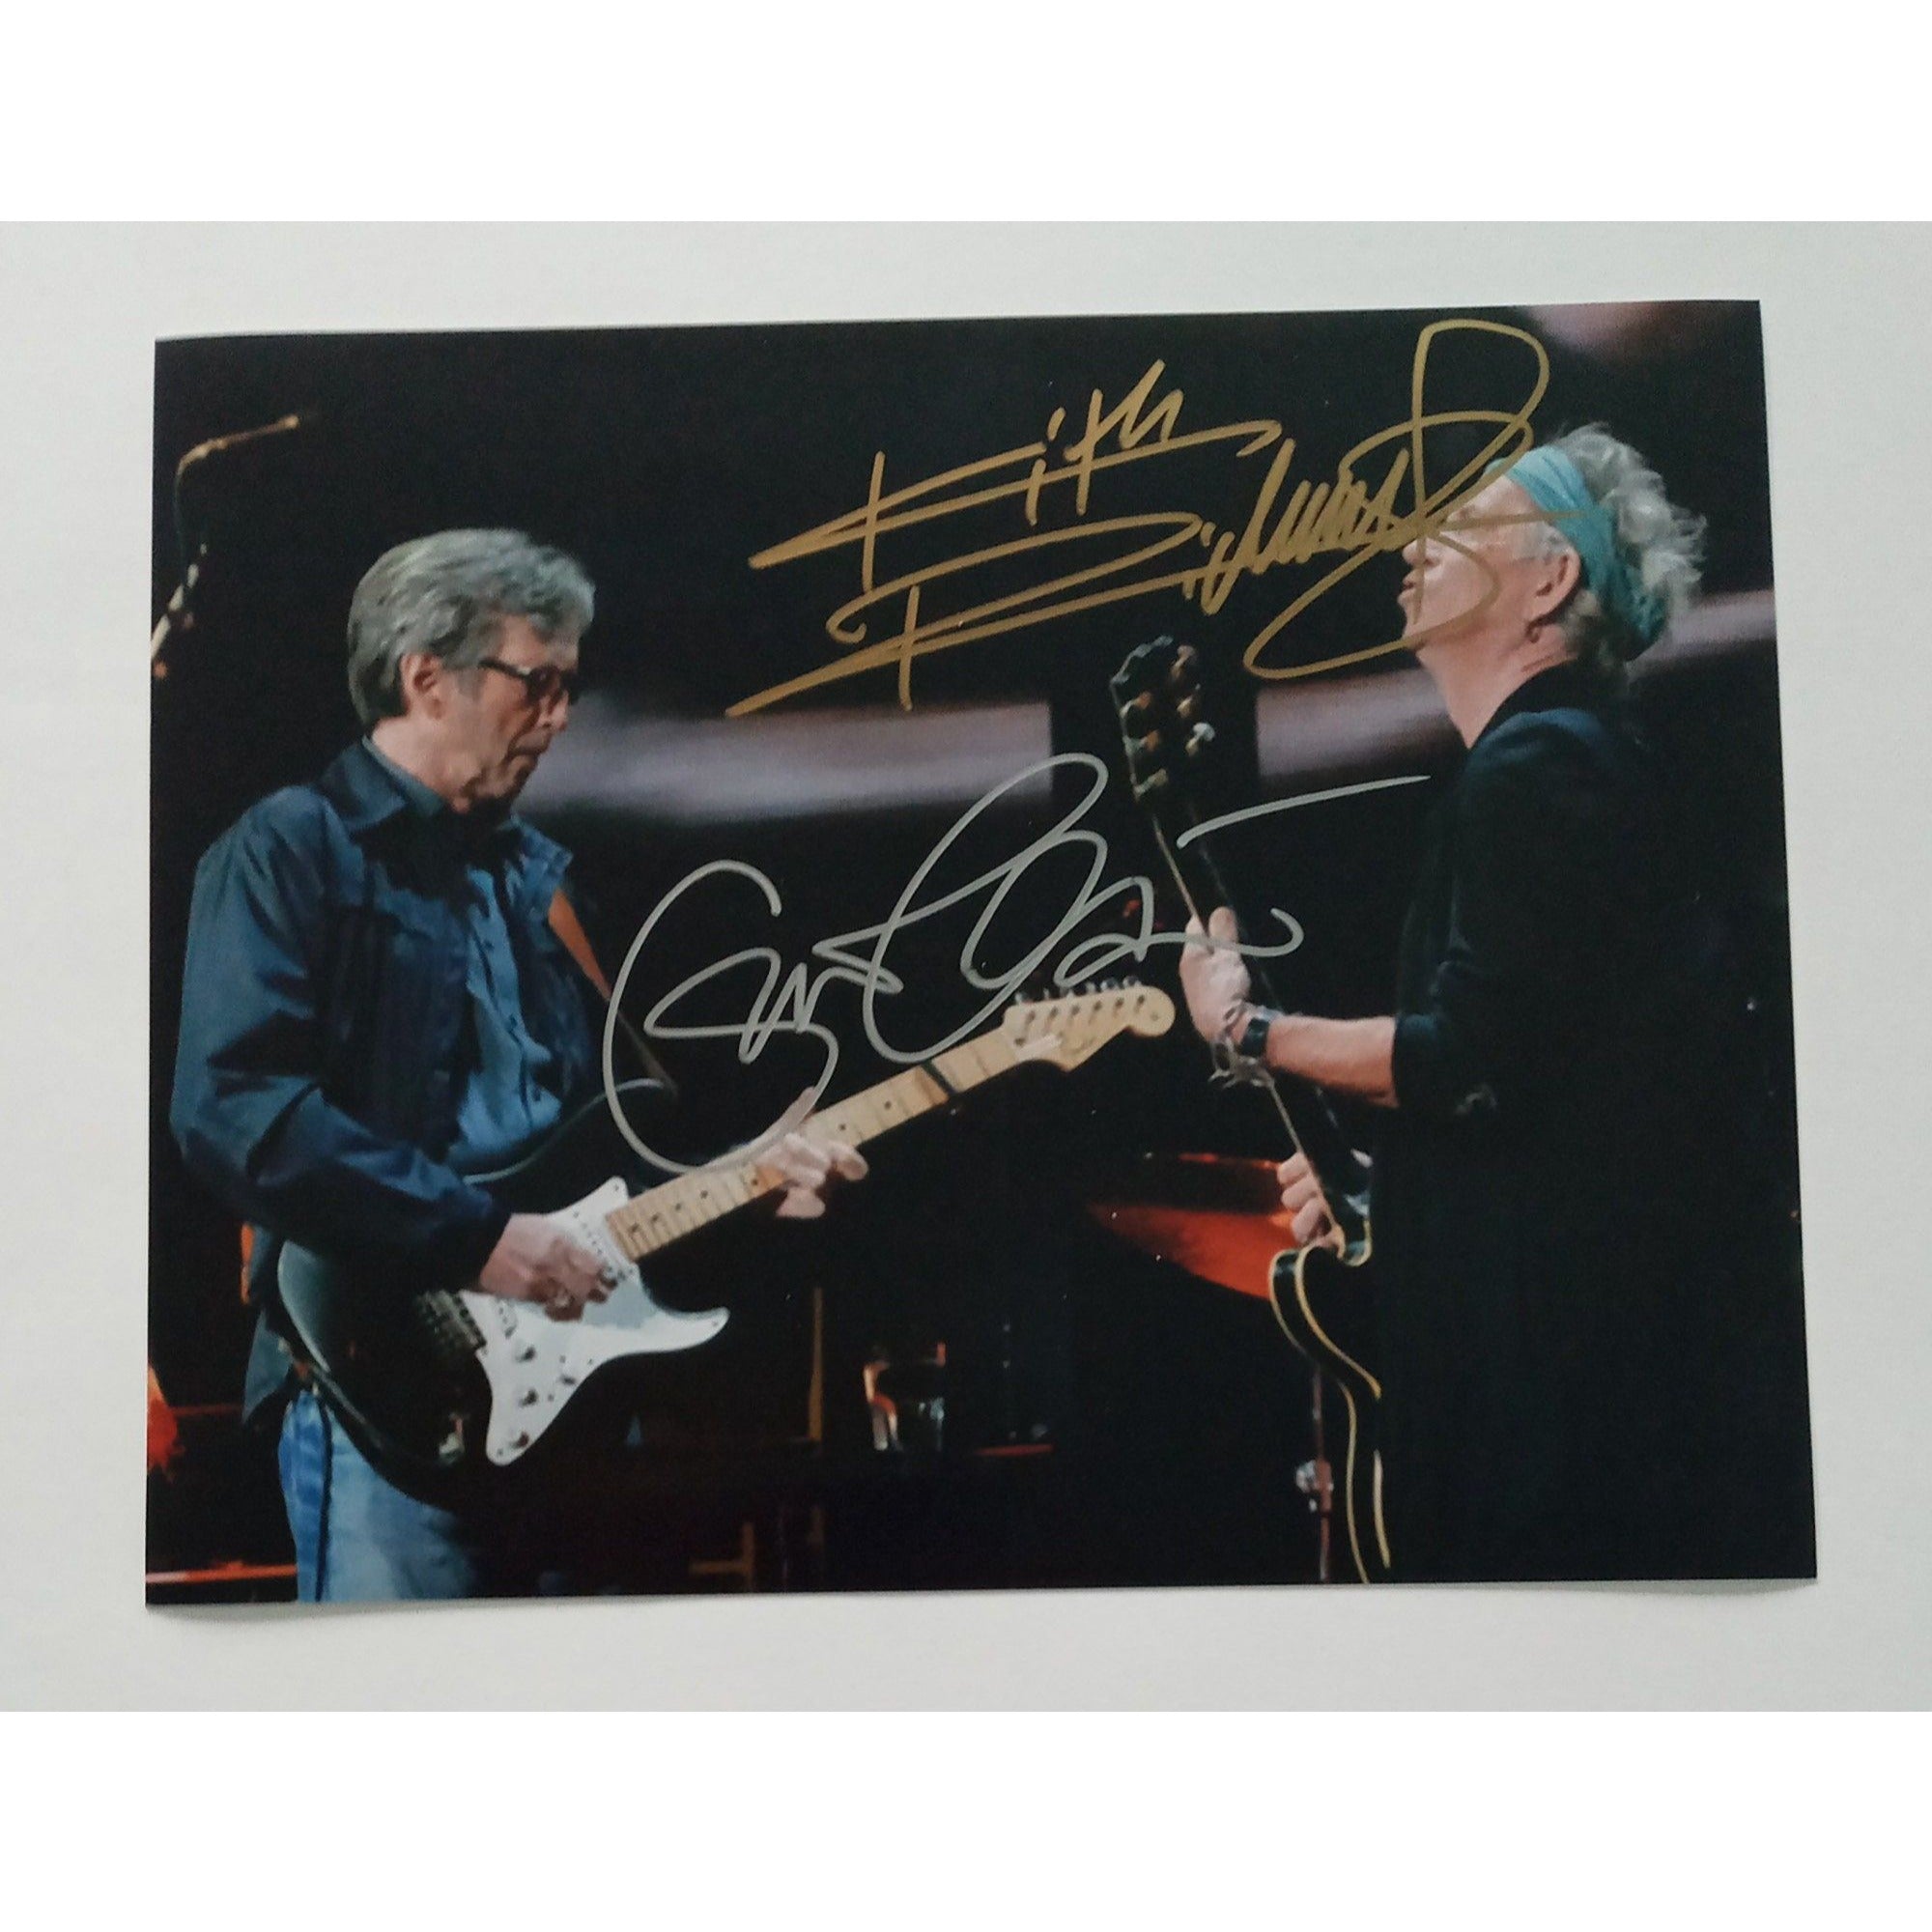 Eric Clapton and Keith Richards 8 x 10 signed photo with proof